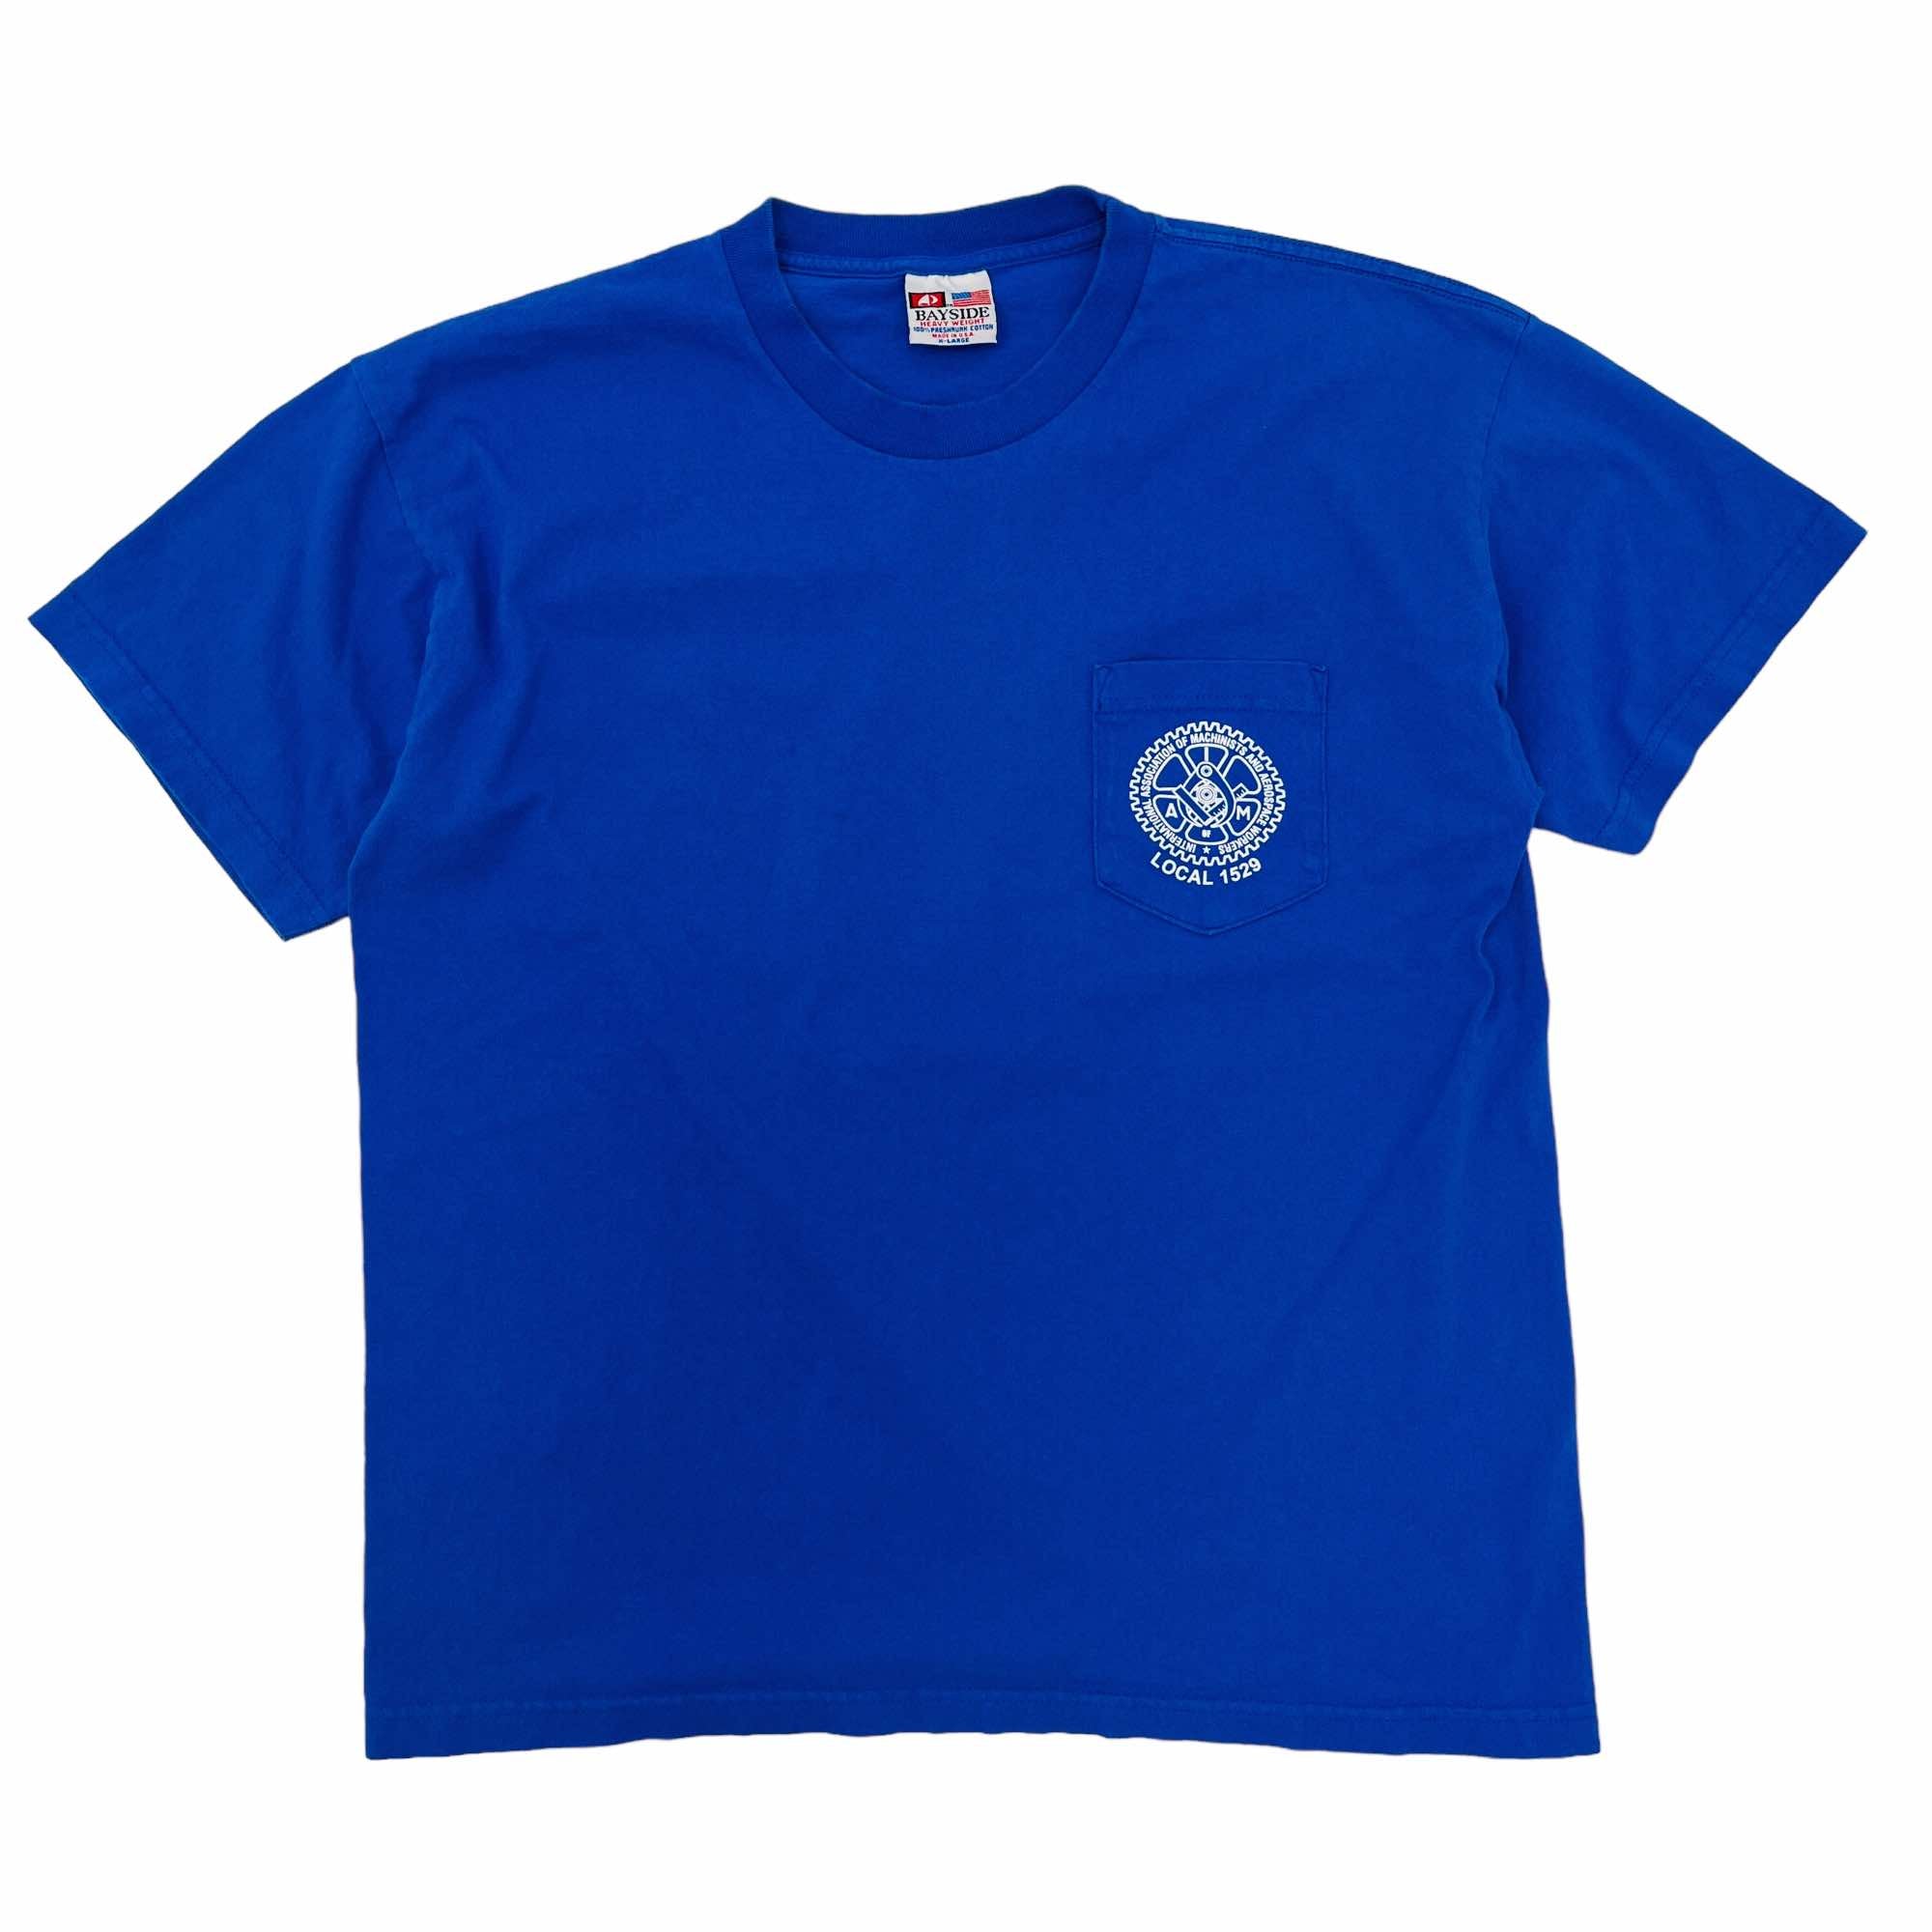 Local 1529 Graphic T-Shirt  - Large